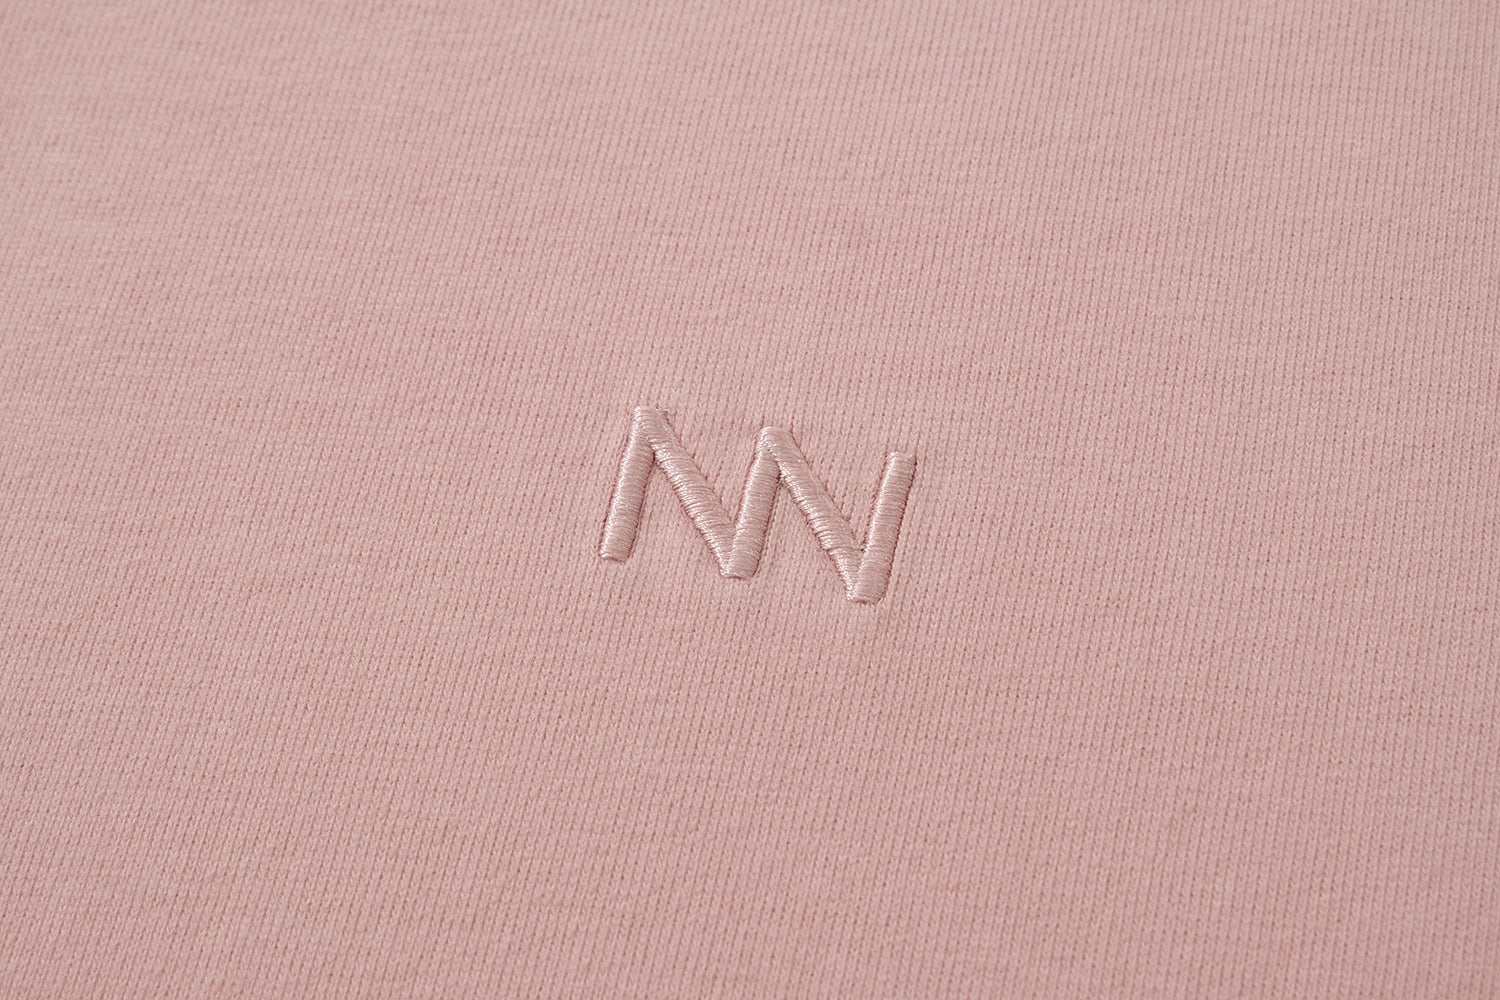 NW215PK | LAYER TEE | NOT WORKING V